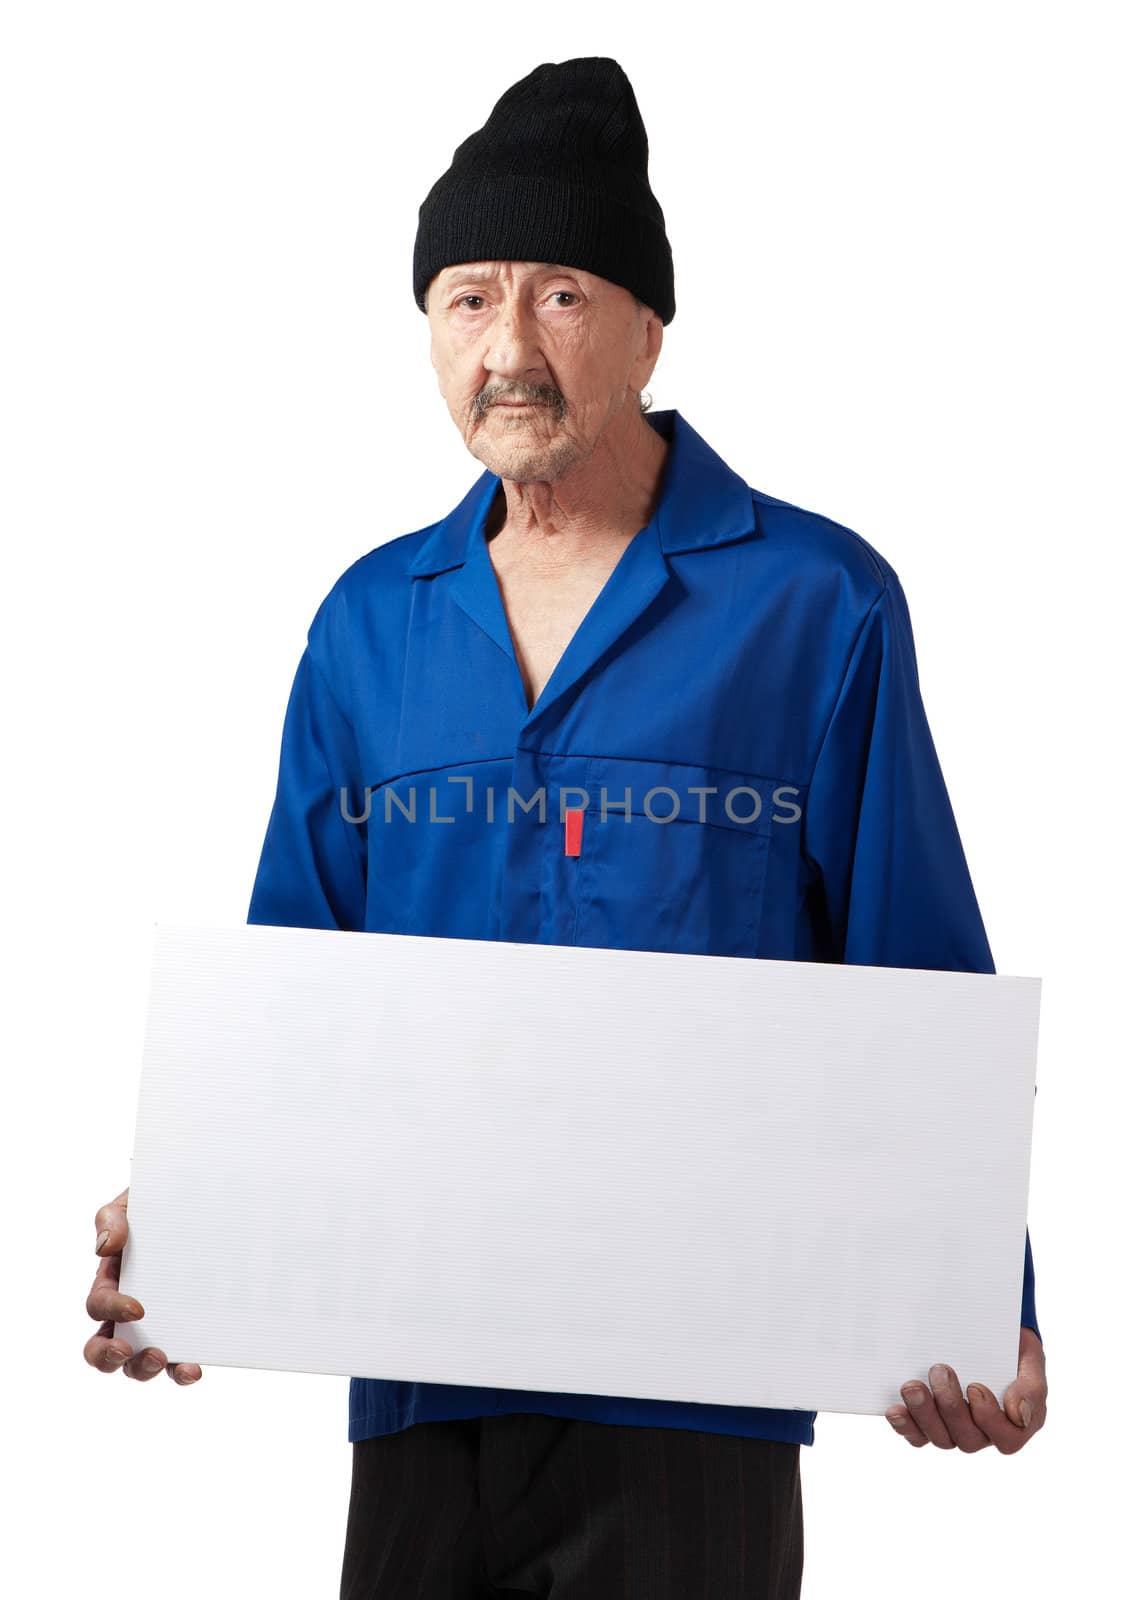 A serious senior worker displays a blank poster.